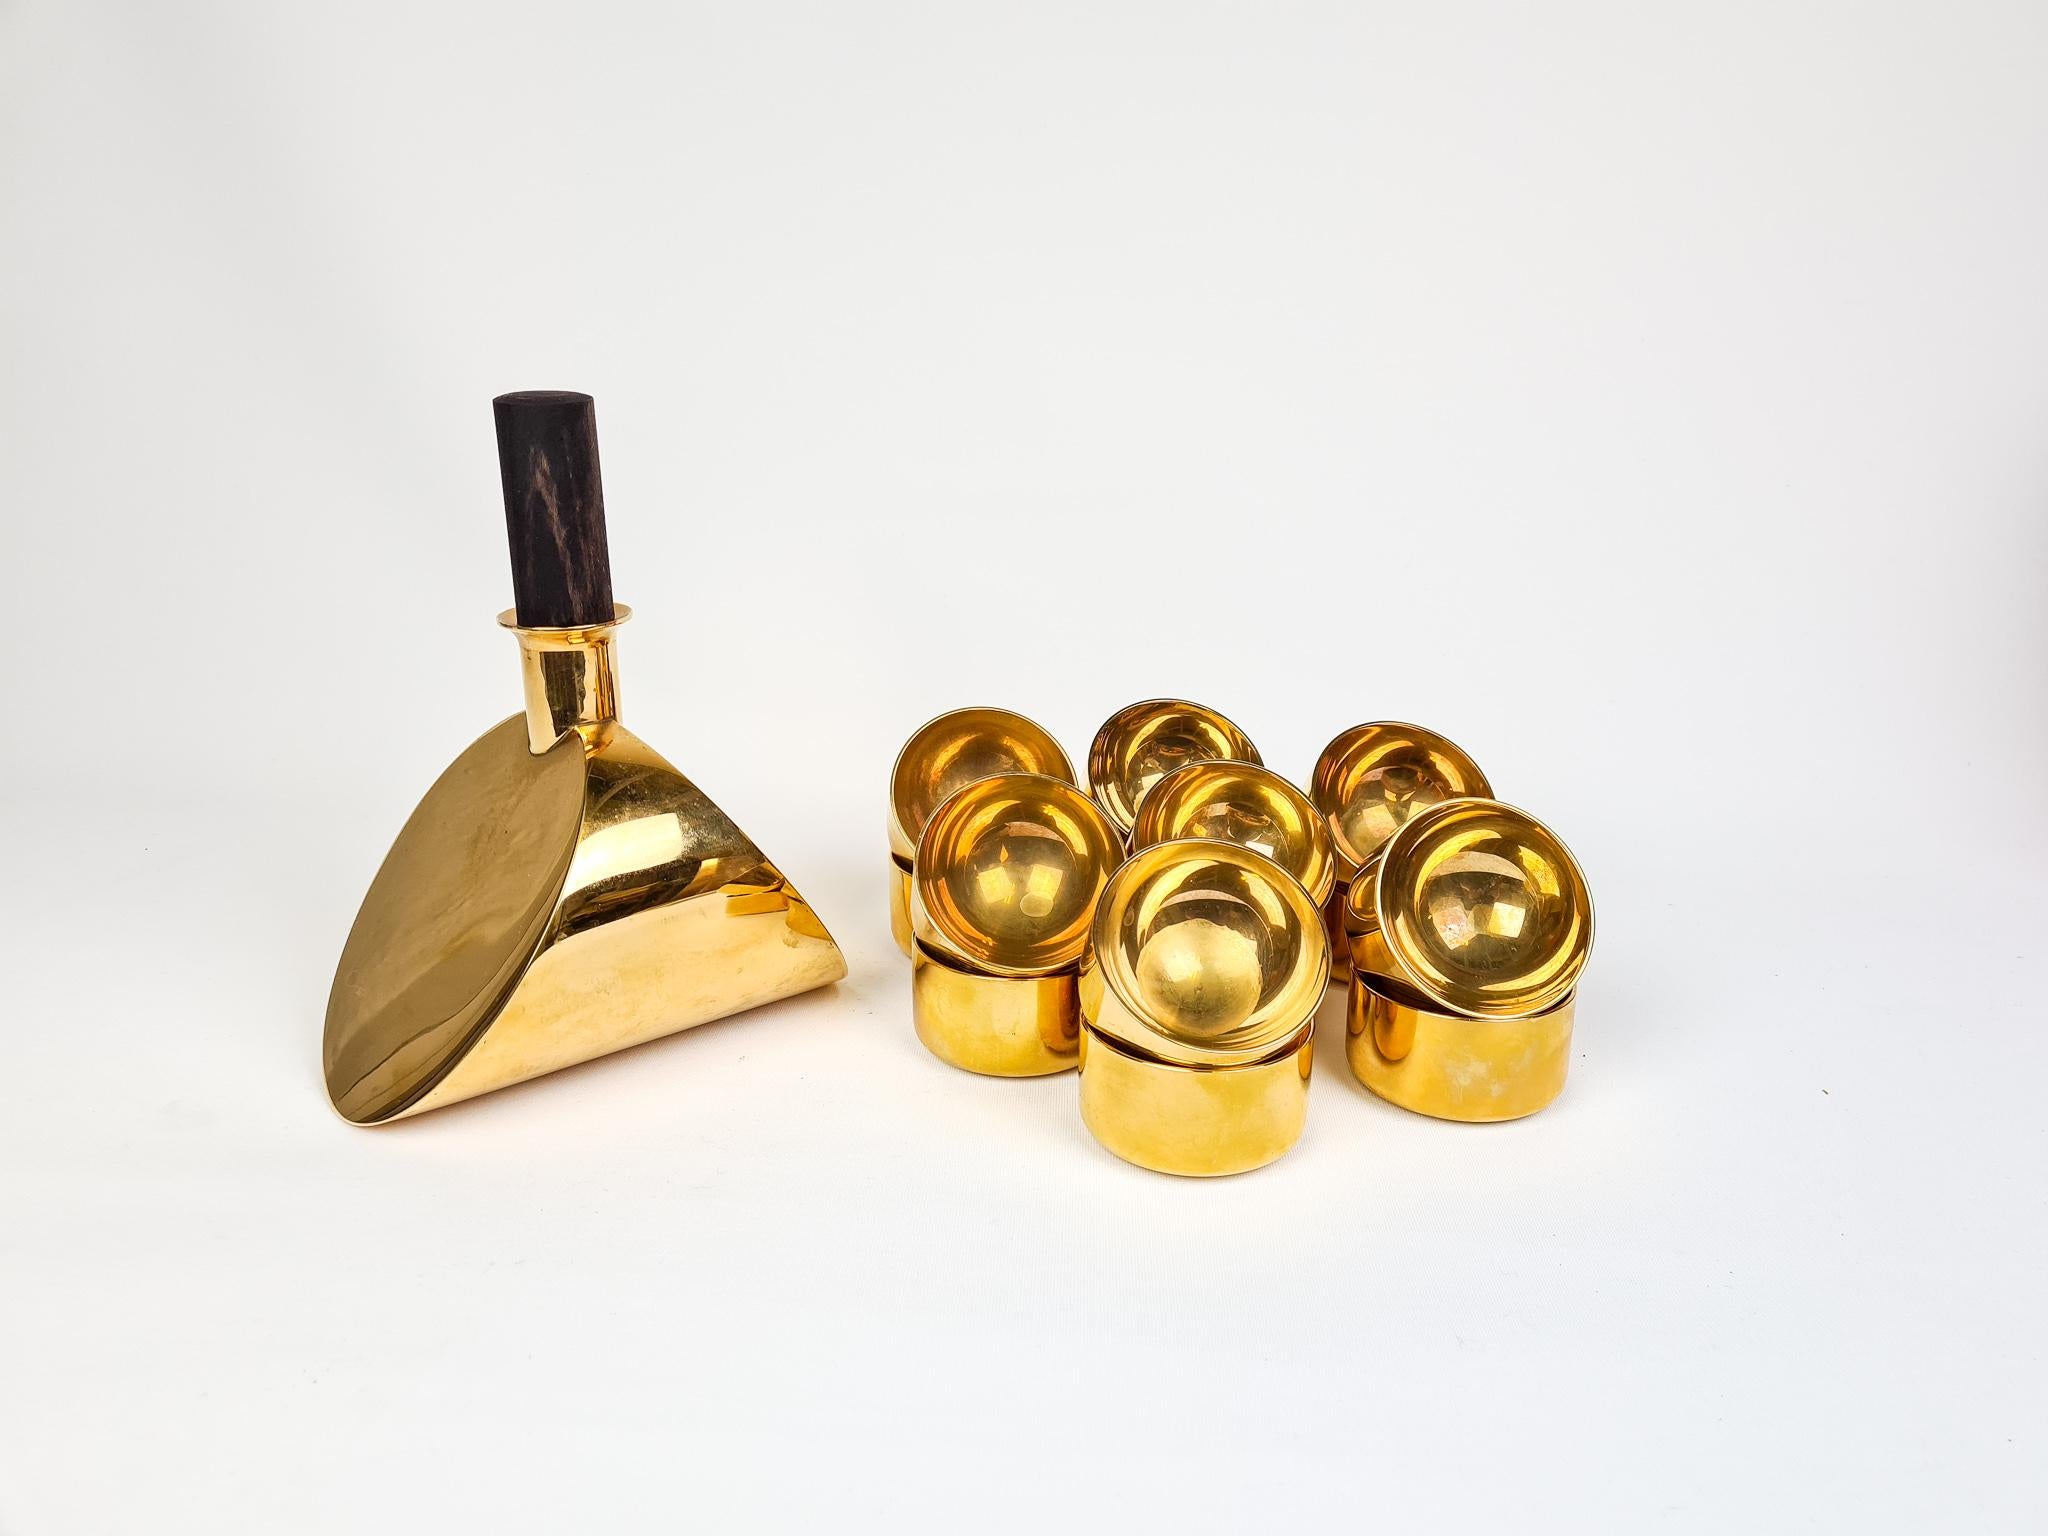 Scandinavian Modern Collection of Decanter and Bowls in Brass Pierre Forsell Skultuna, Sweden, 1970s For Sale